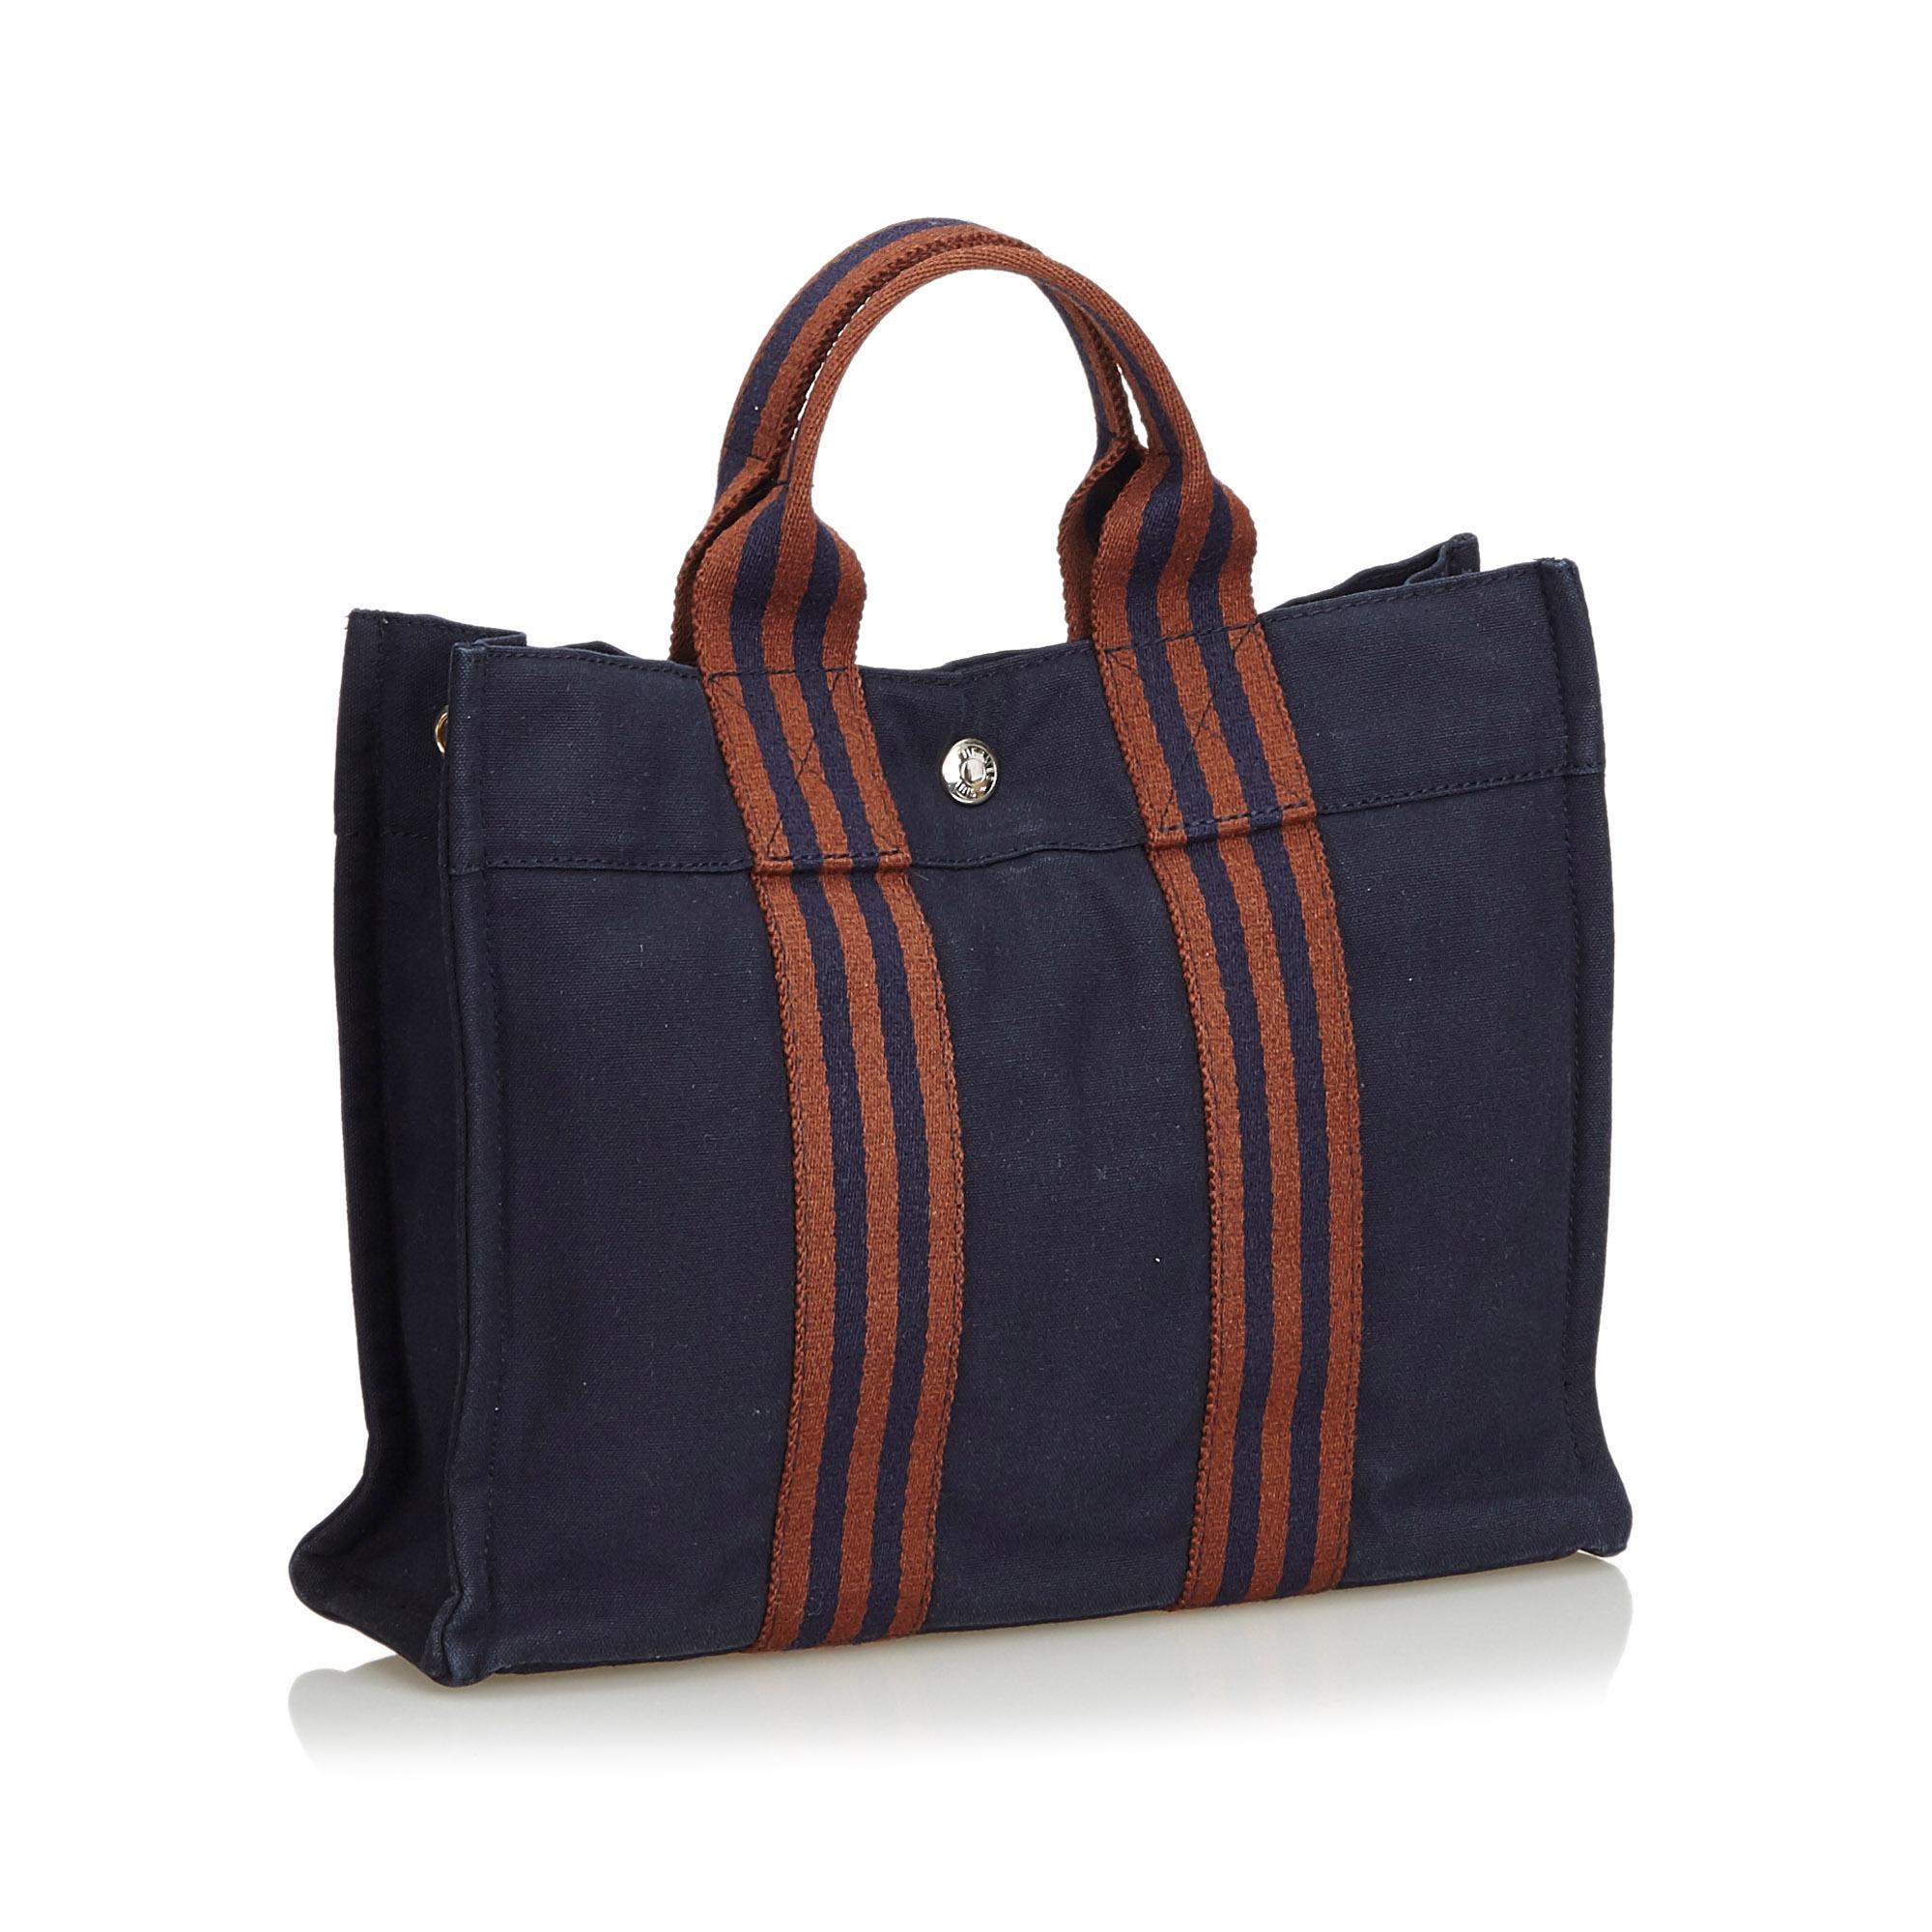 The Fourre Tout PM tote features a canvas body, flat straps, an open top with a snap closure, and an interior zip compartment. It carries as B+ condition rating.

Inclusions: 
This item does not come with inclusions.

Dimensions:
Length: 22.00